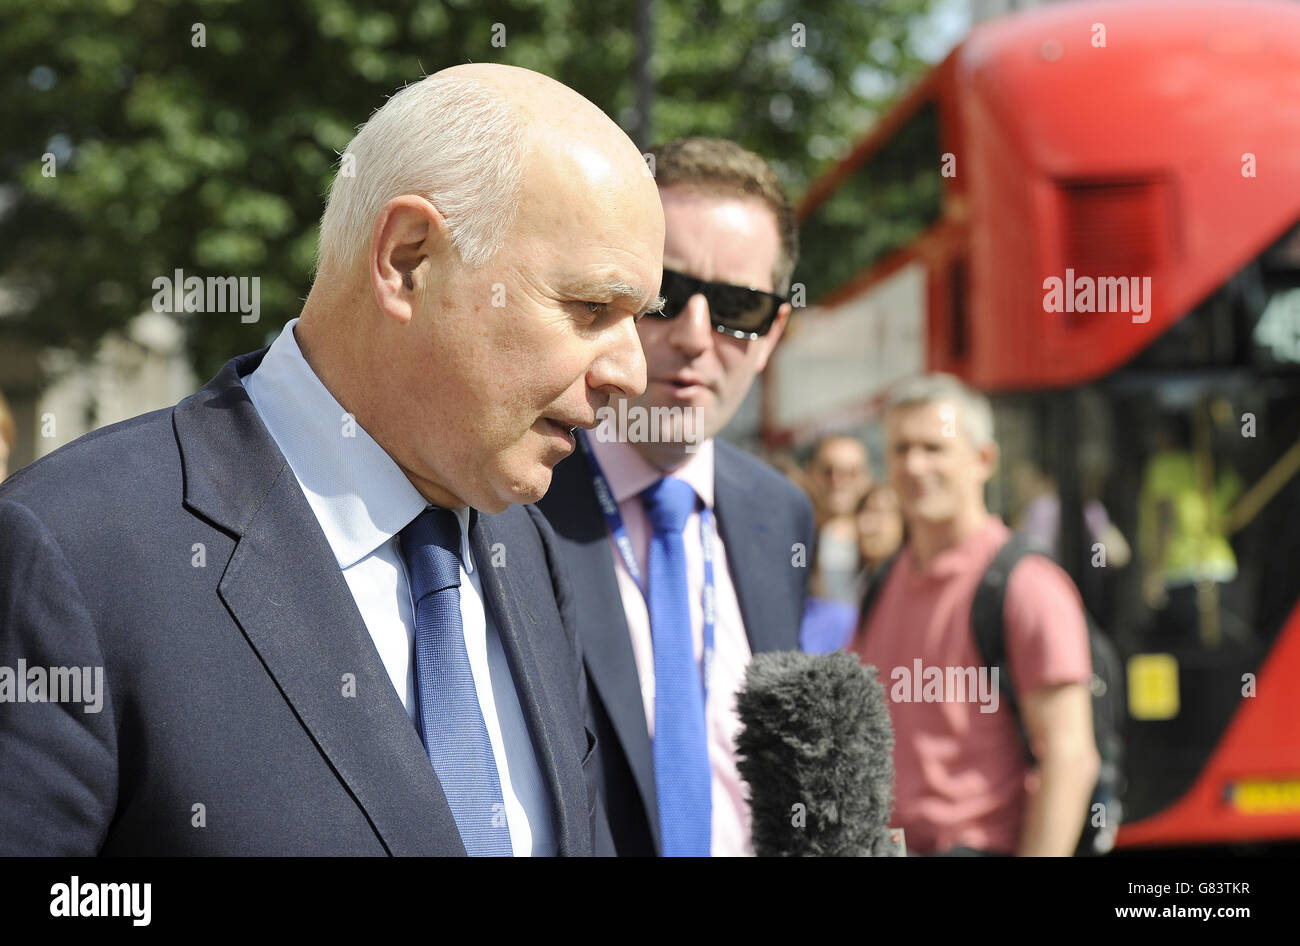 Work and Pensions Secretary Iain Duncan Smith leaves the Cabinet Office in Whitehall, London, as Prime Minister David Cameron chaired a meeting with Chancellor George Osborne, Bank of England governor Mark Carney and other senior officials to assess the likely impact of the Greek referendum vote to reject the austerity terms demanded by its international creditors on the UK. Stock Photo